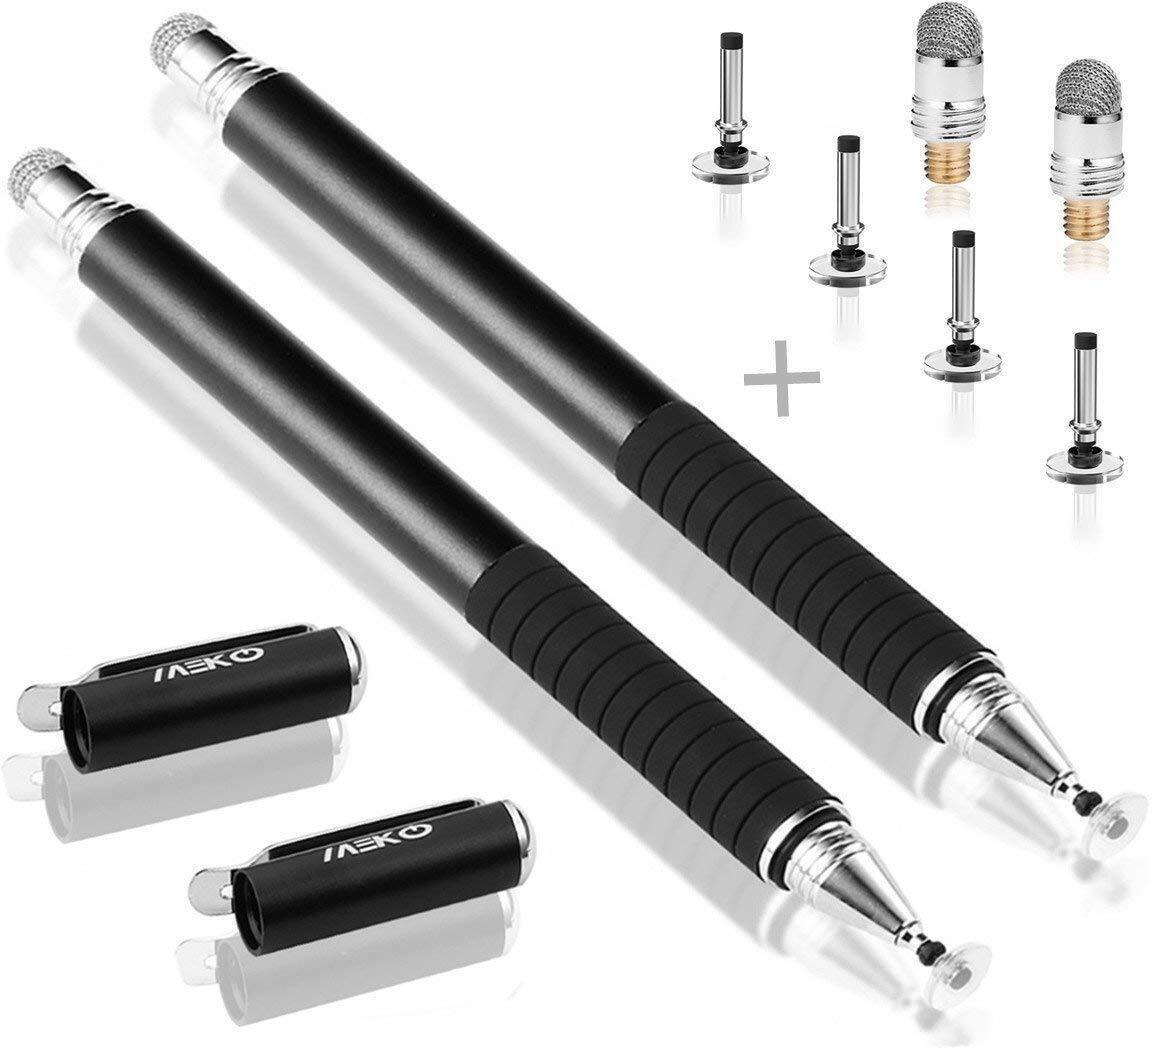 MEKO stylus touch pen Set of 2 pieces with Replacement Tips 6 pcs ‎MEKO-DISC1